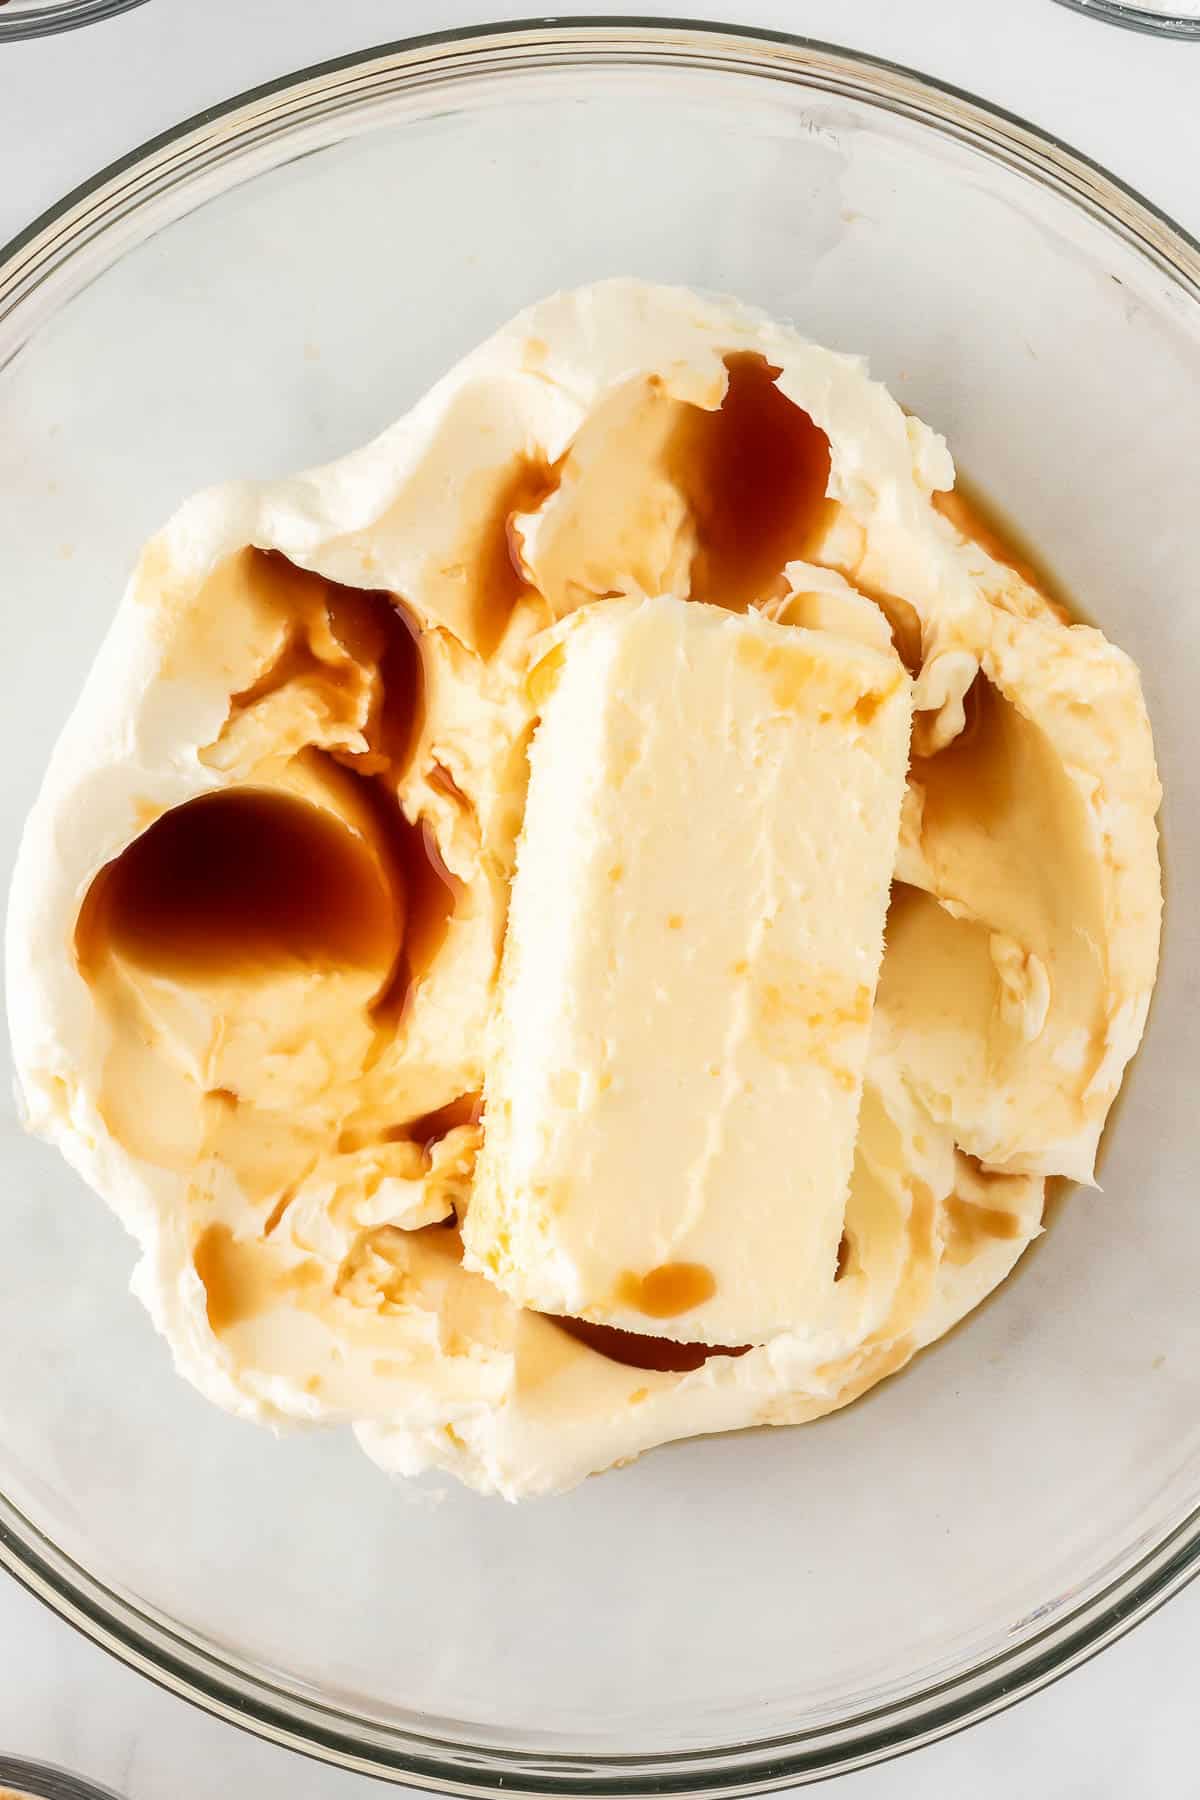 butter, cream cheese, and vanilla extract